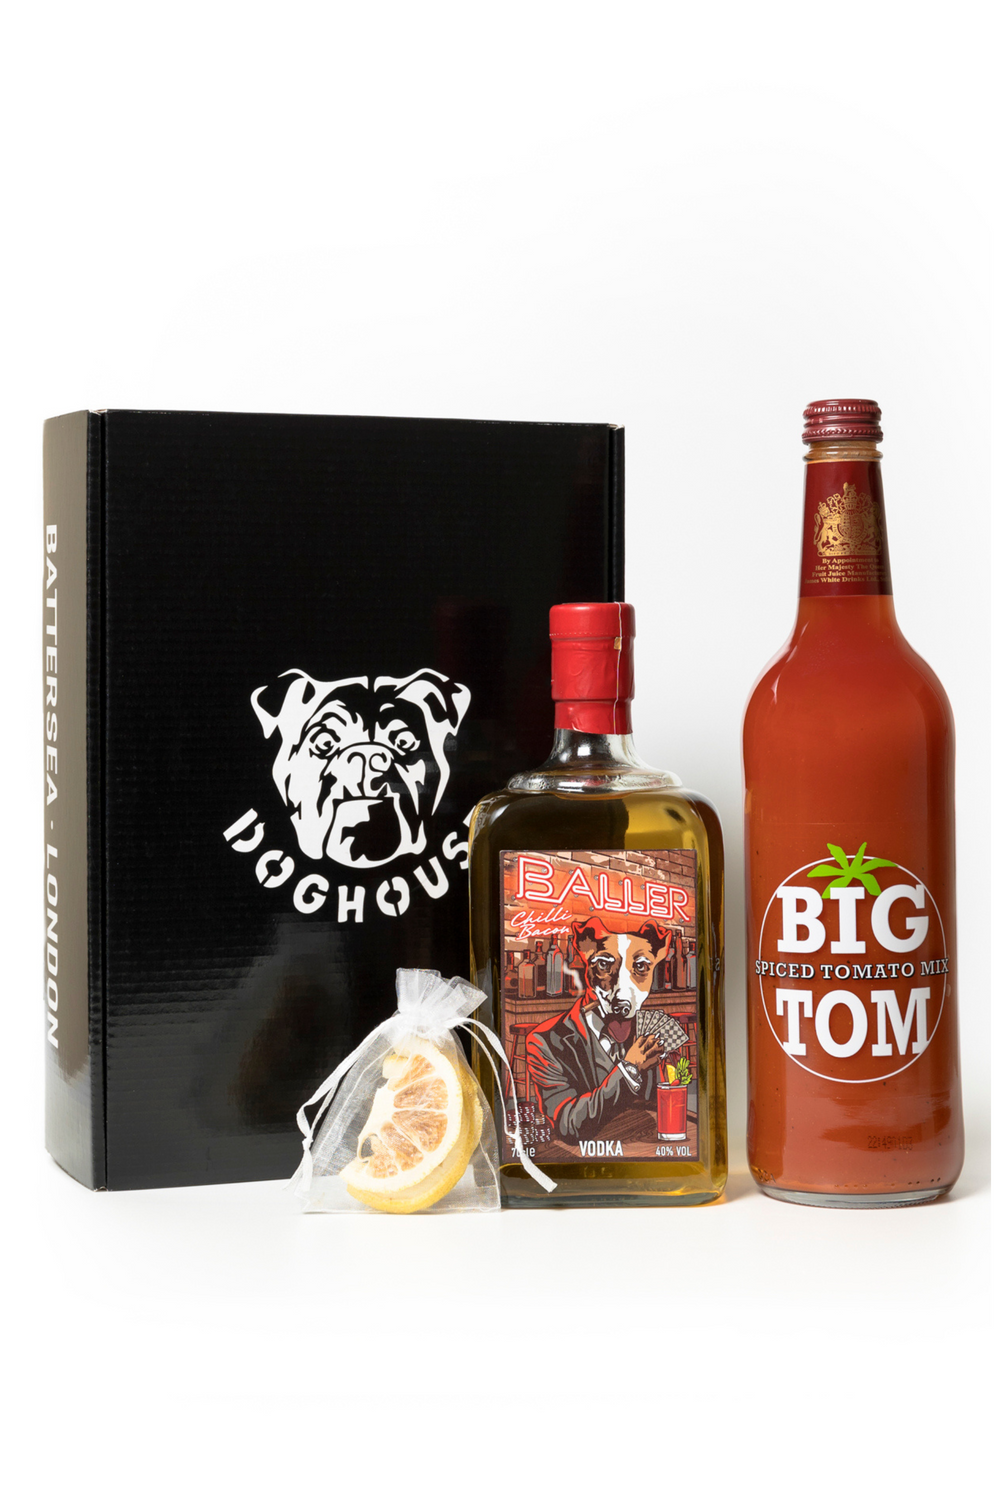 Baller 'Chilli Bacon' Bloody Mary Kit (70cl)